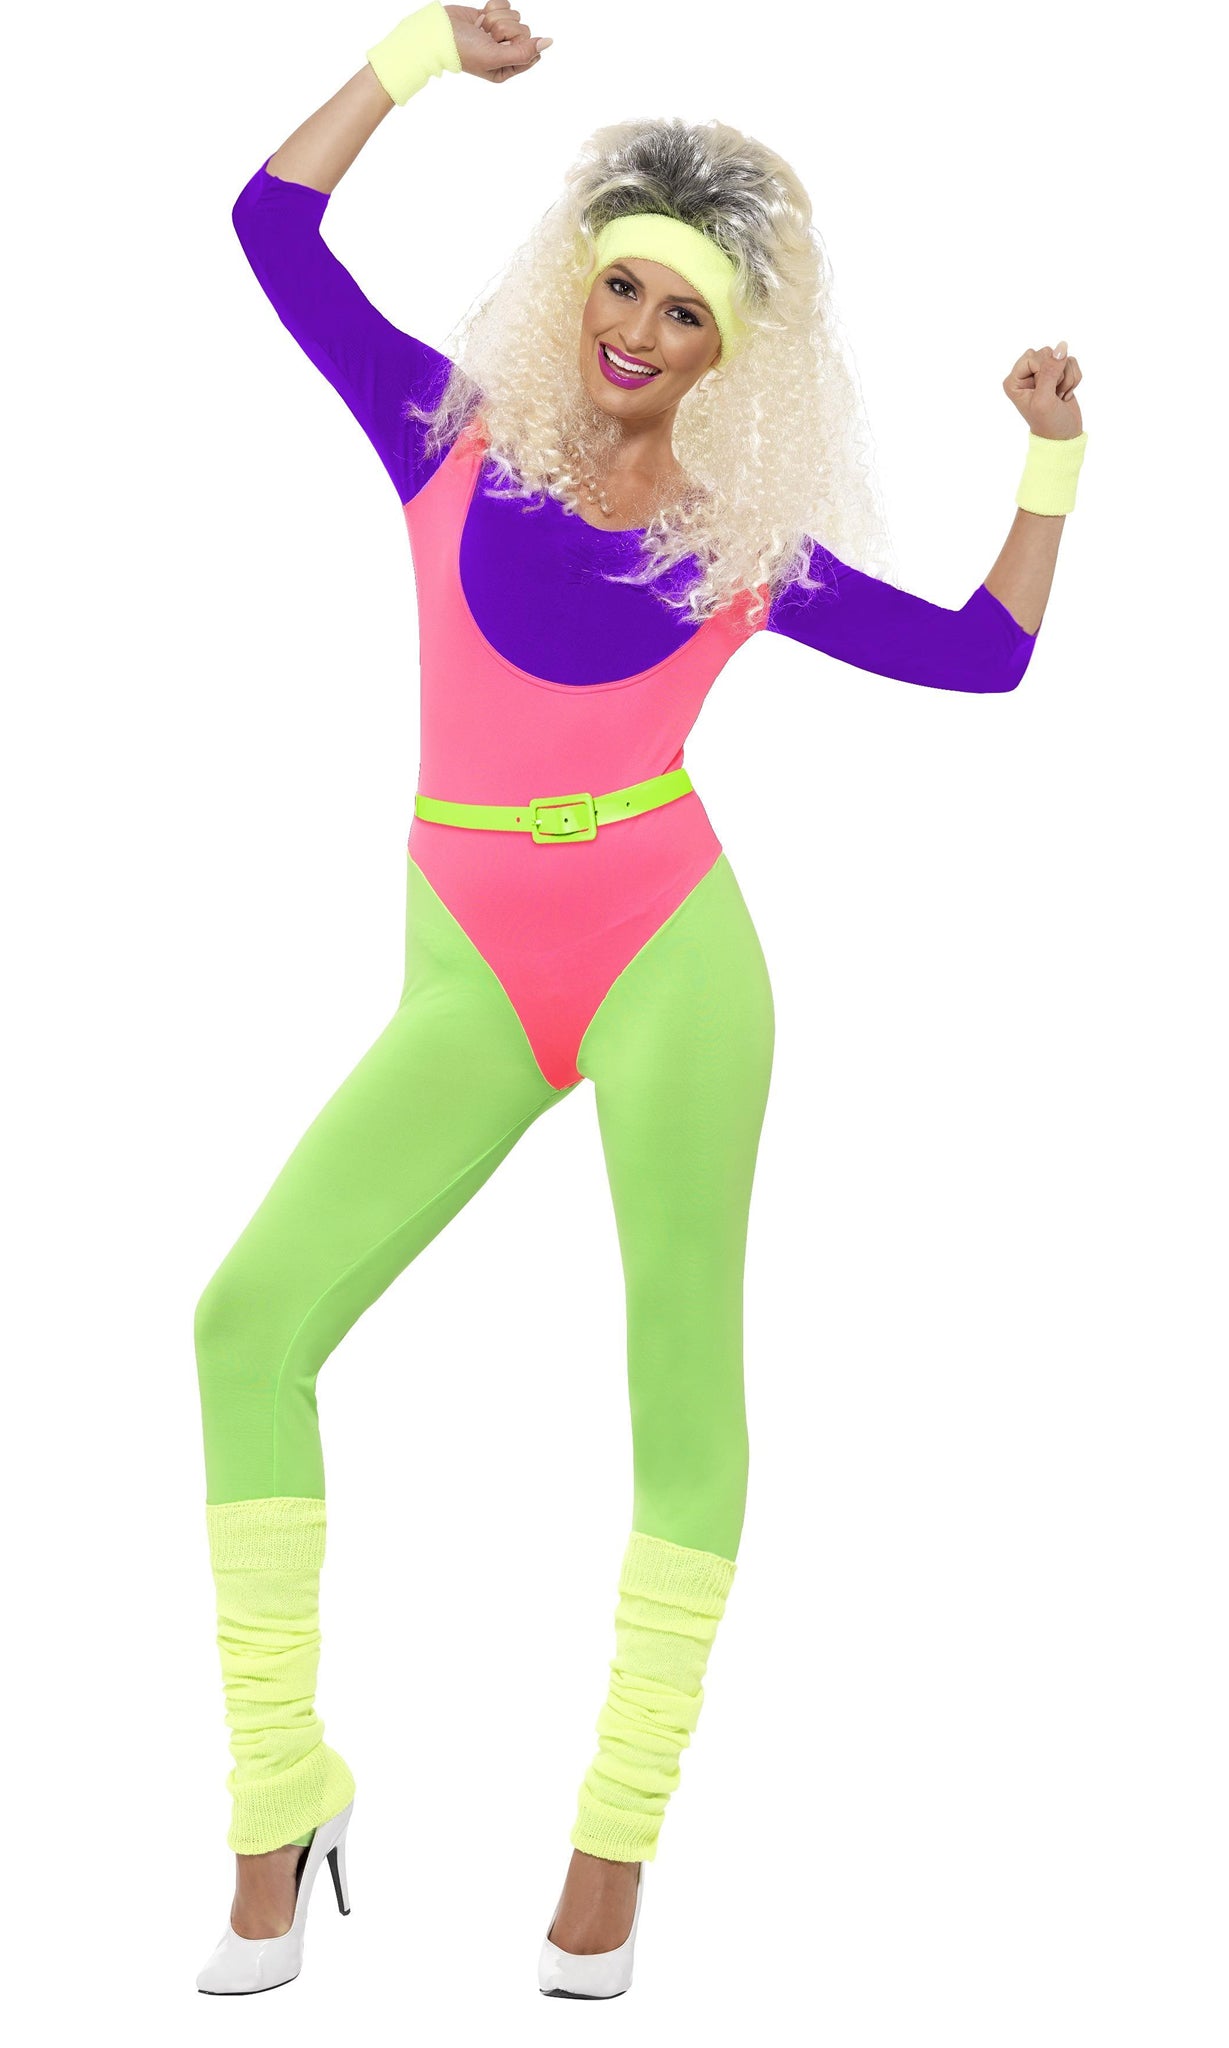 80s workout aerobics jumpsuit costume with headband and wristbands